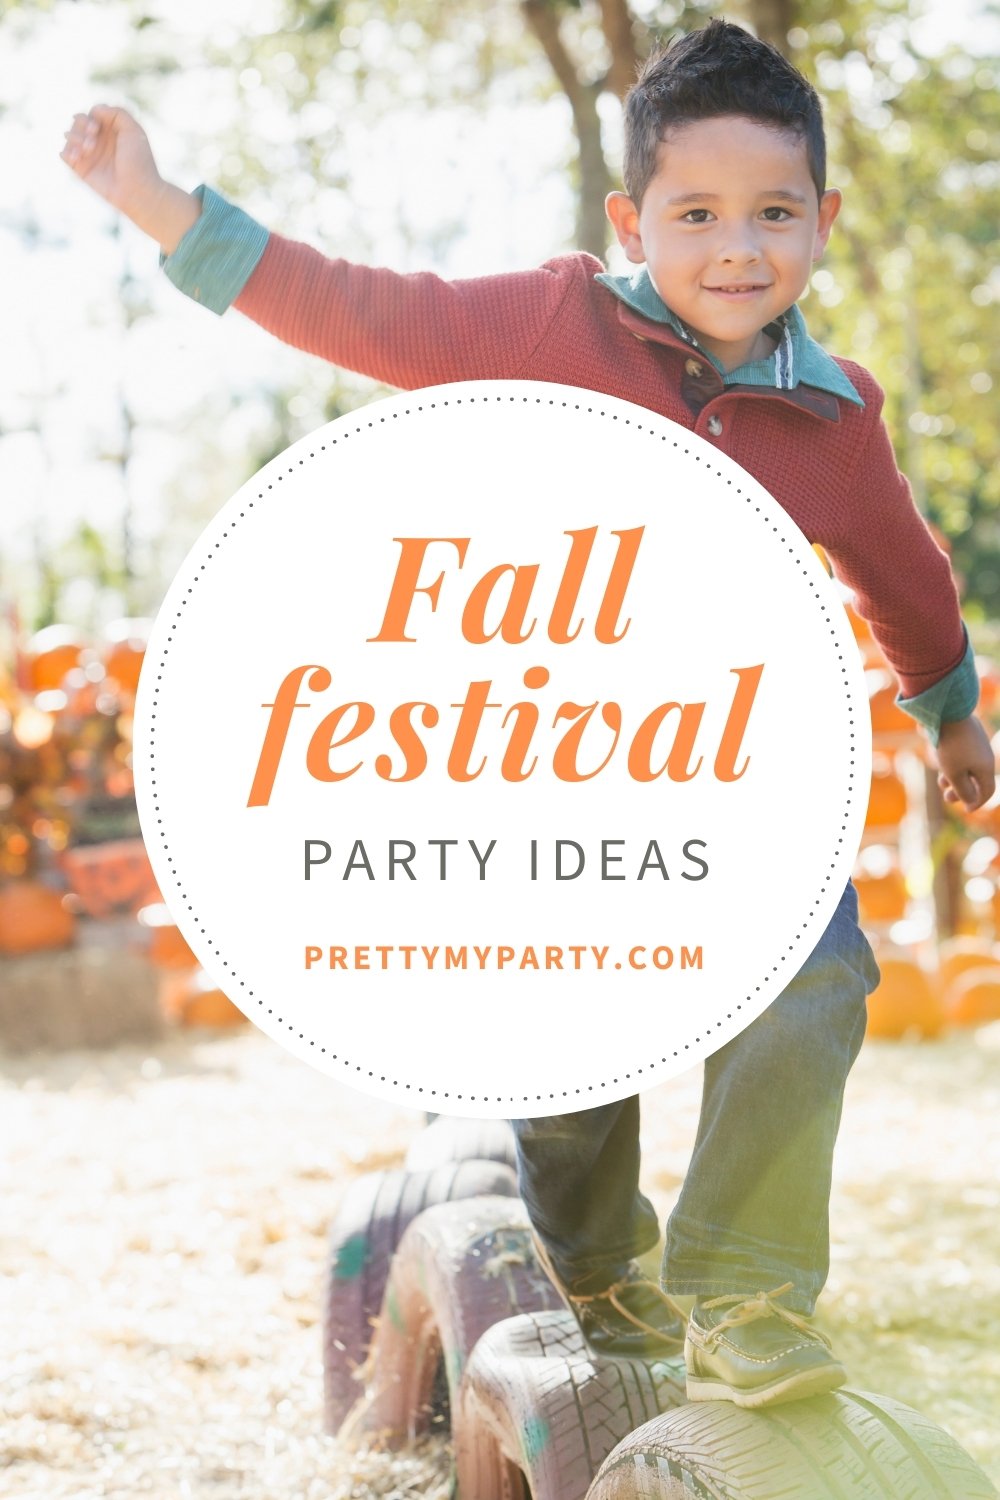 Fall Festival Party Ideas on Pretty My Party